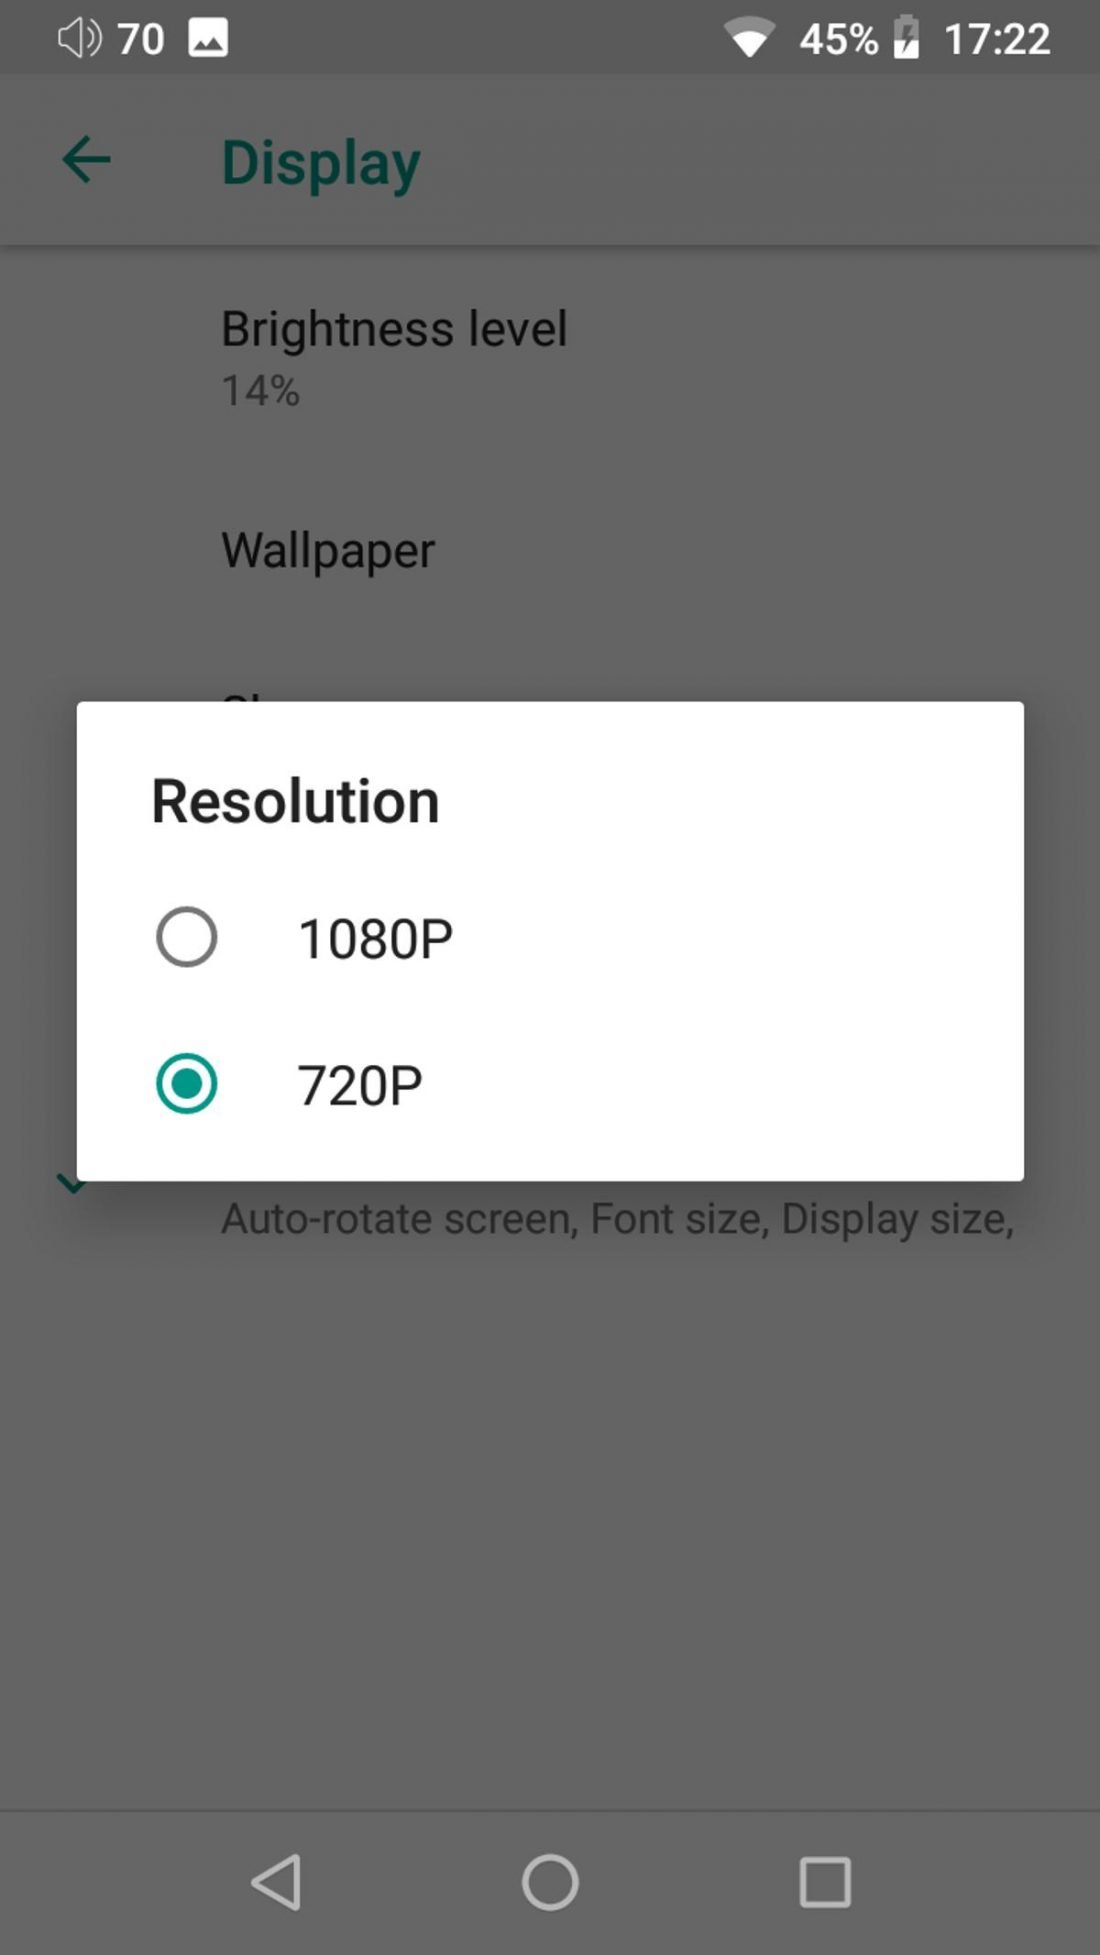 Users can choose between 720P and 1080P for screen resolution.